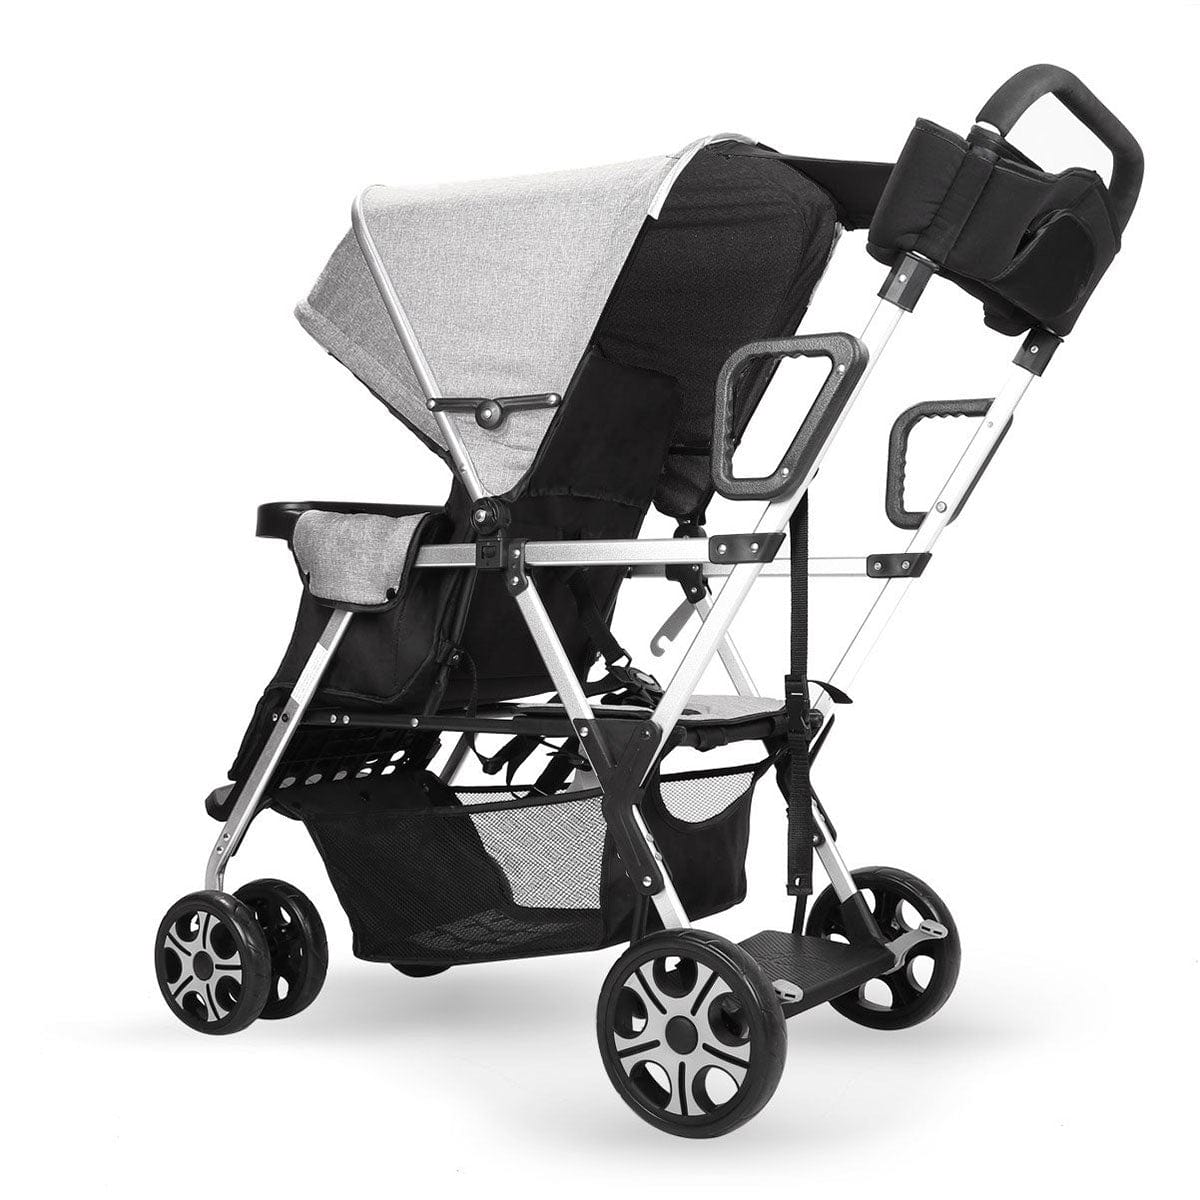 Proactive Baby CynaBaby™ Double Stroller For Twins With Cozy Comfort at Discounted Price